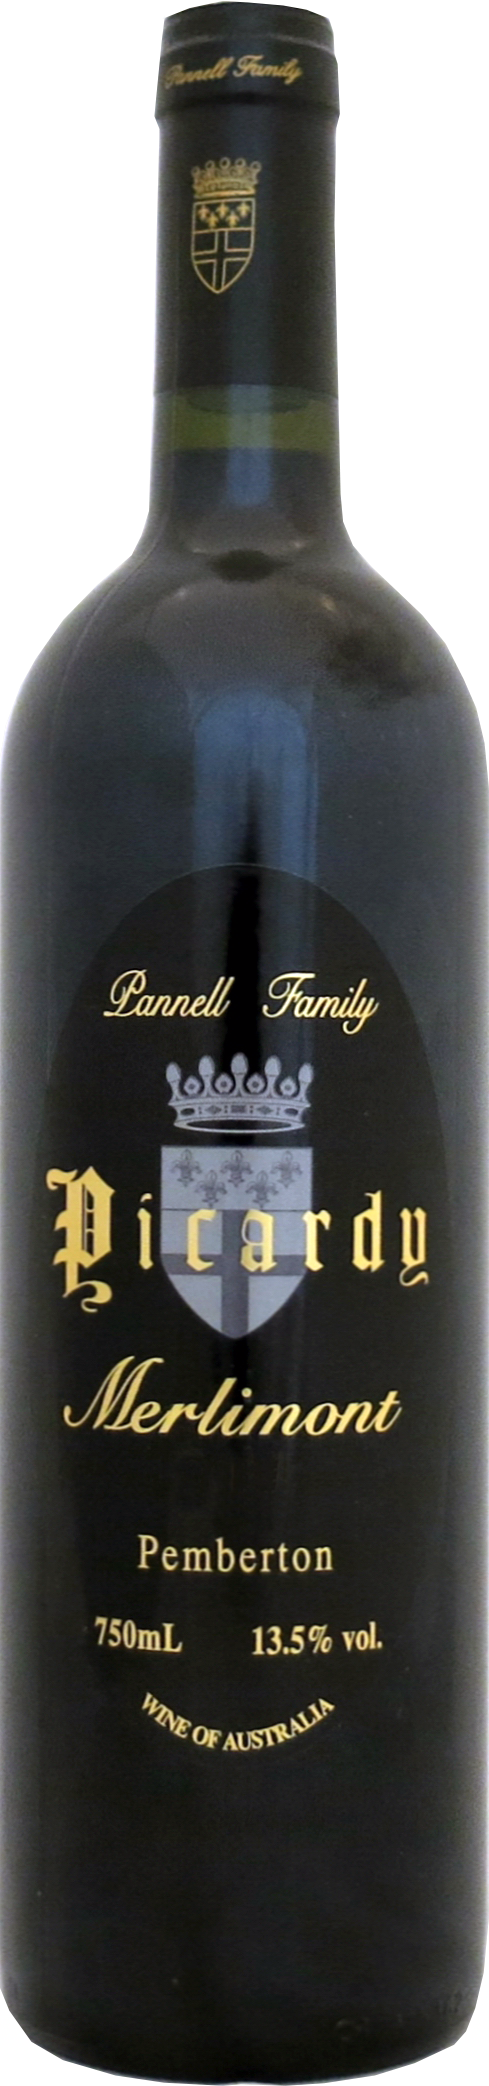 Picardy - Merlimont / 2018 / 750mL